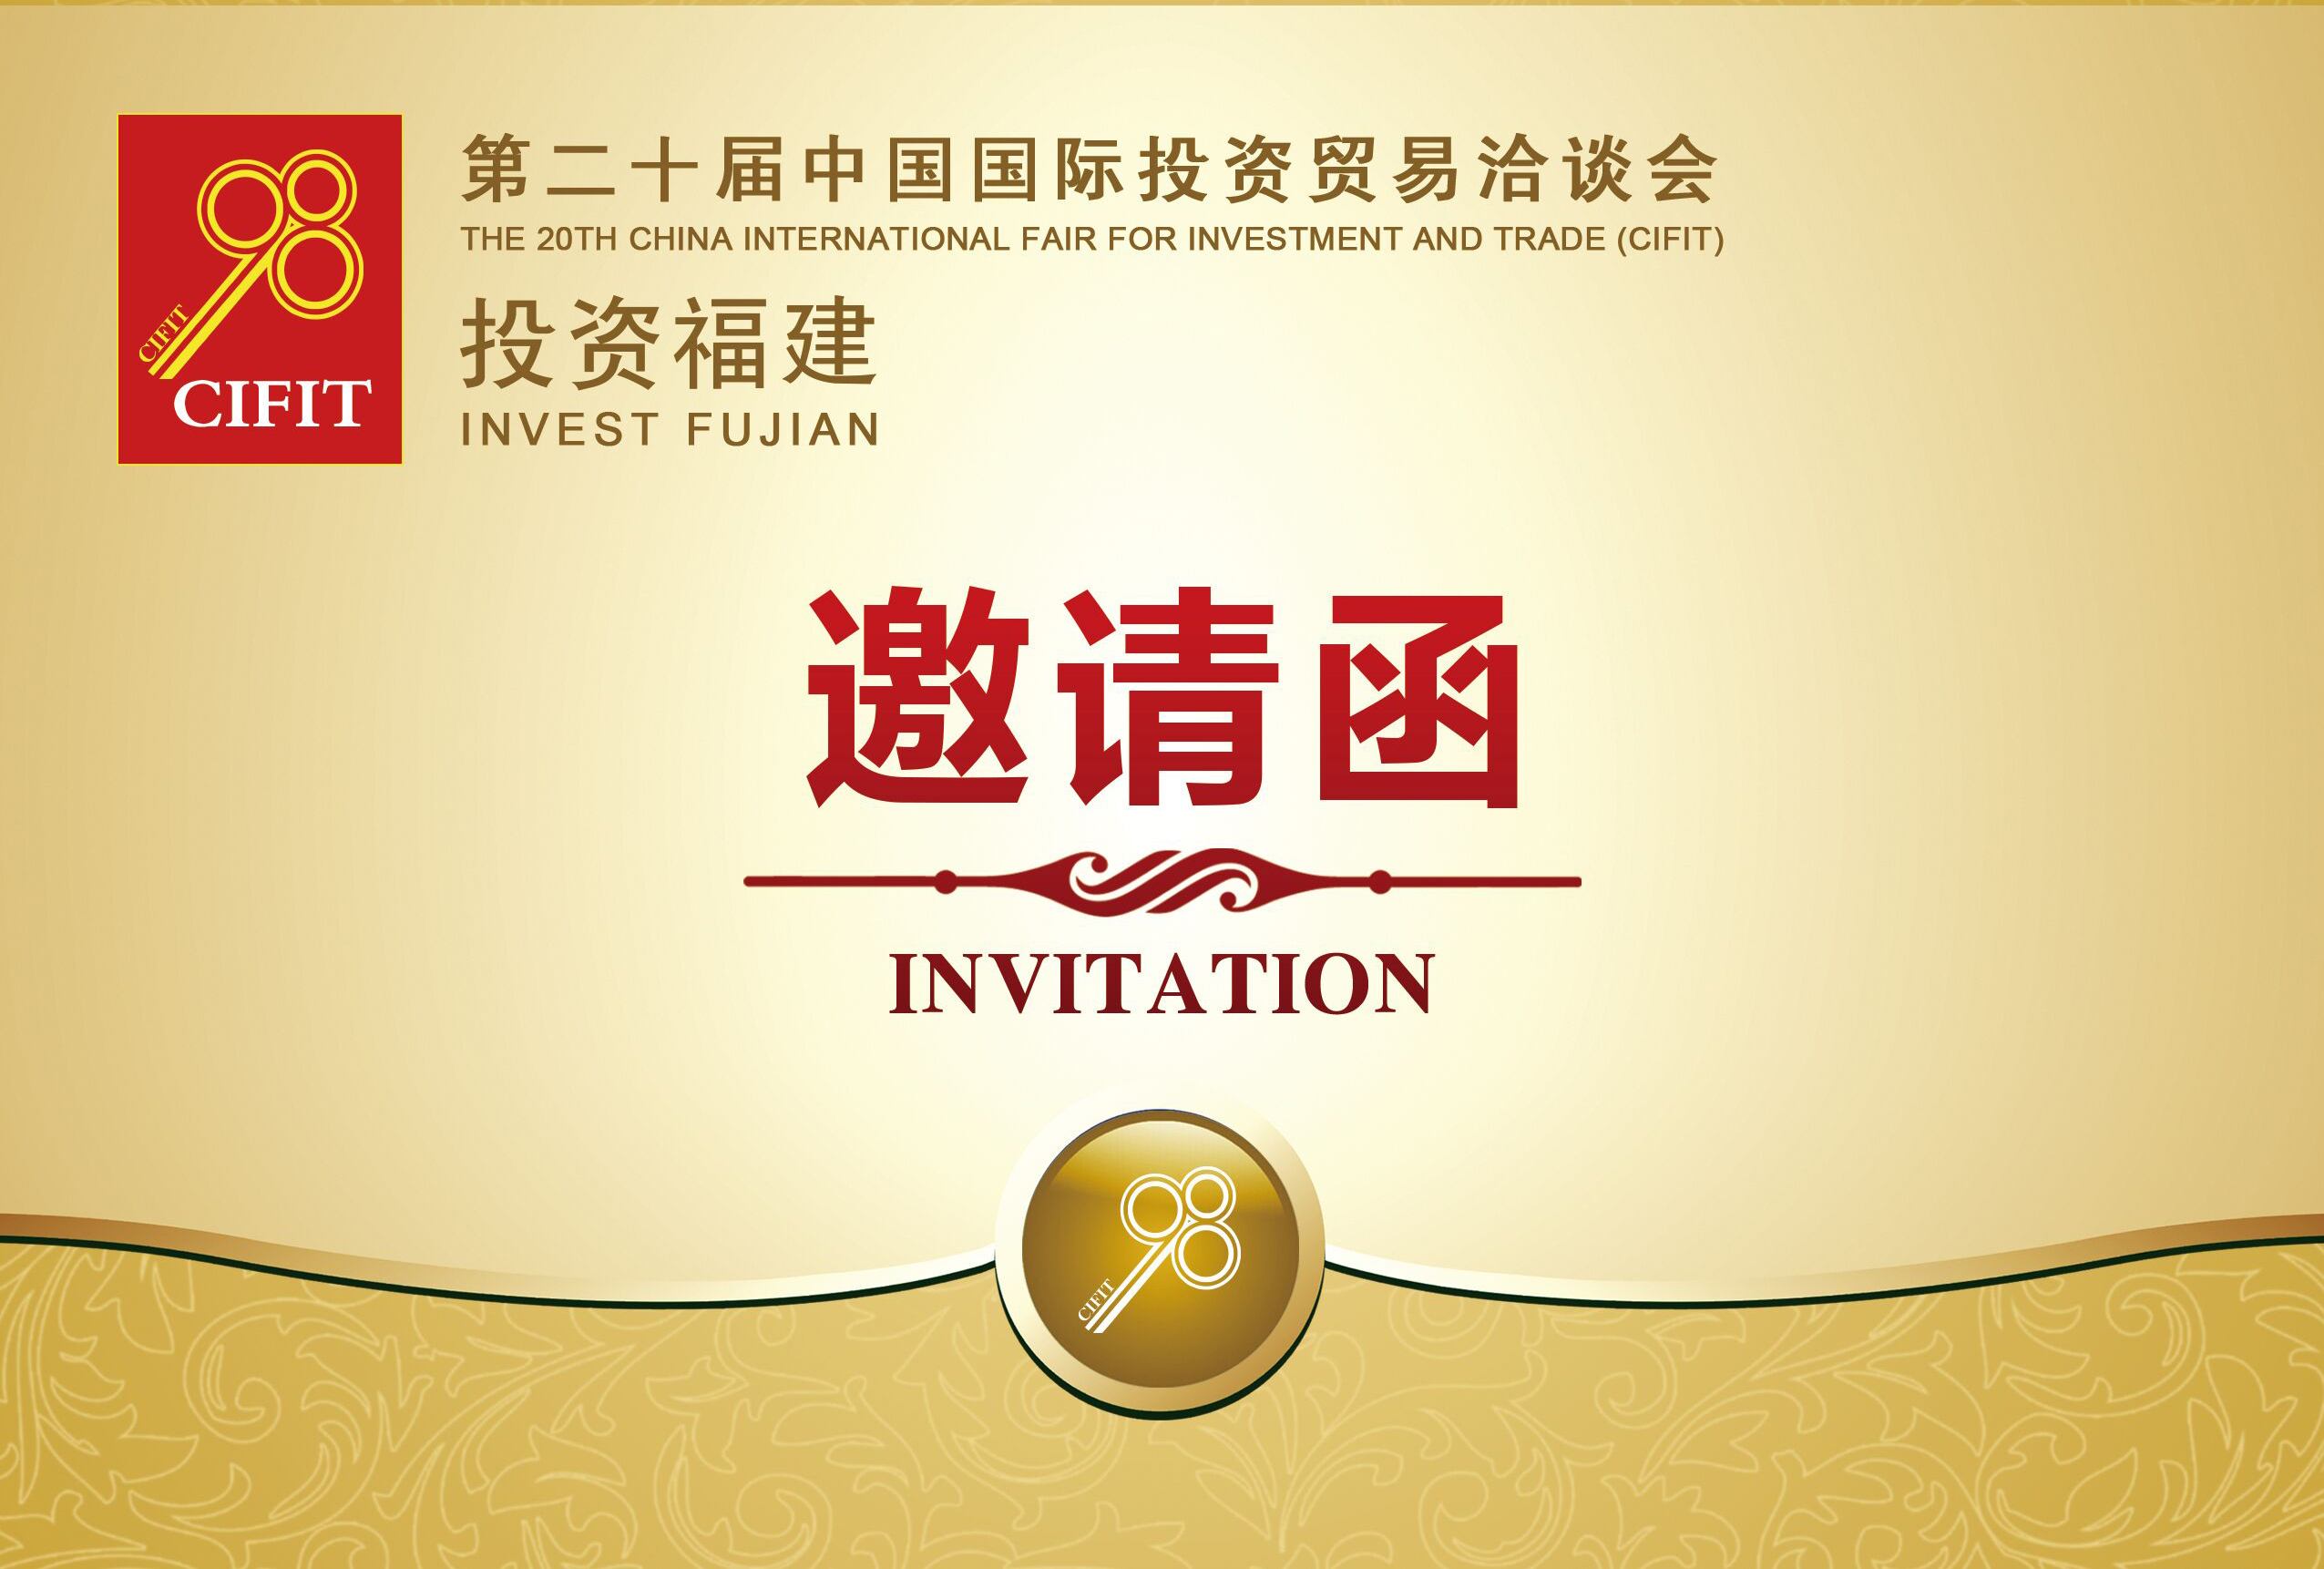 Invitation Of The 20th China International Fair For Investment & Trade